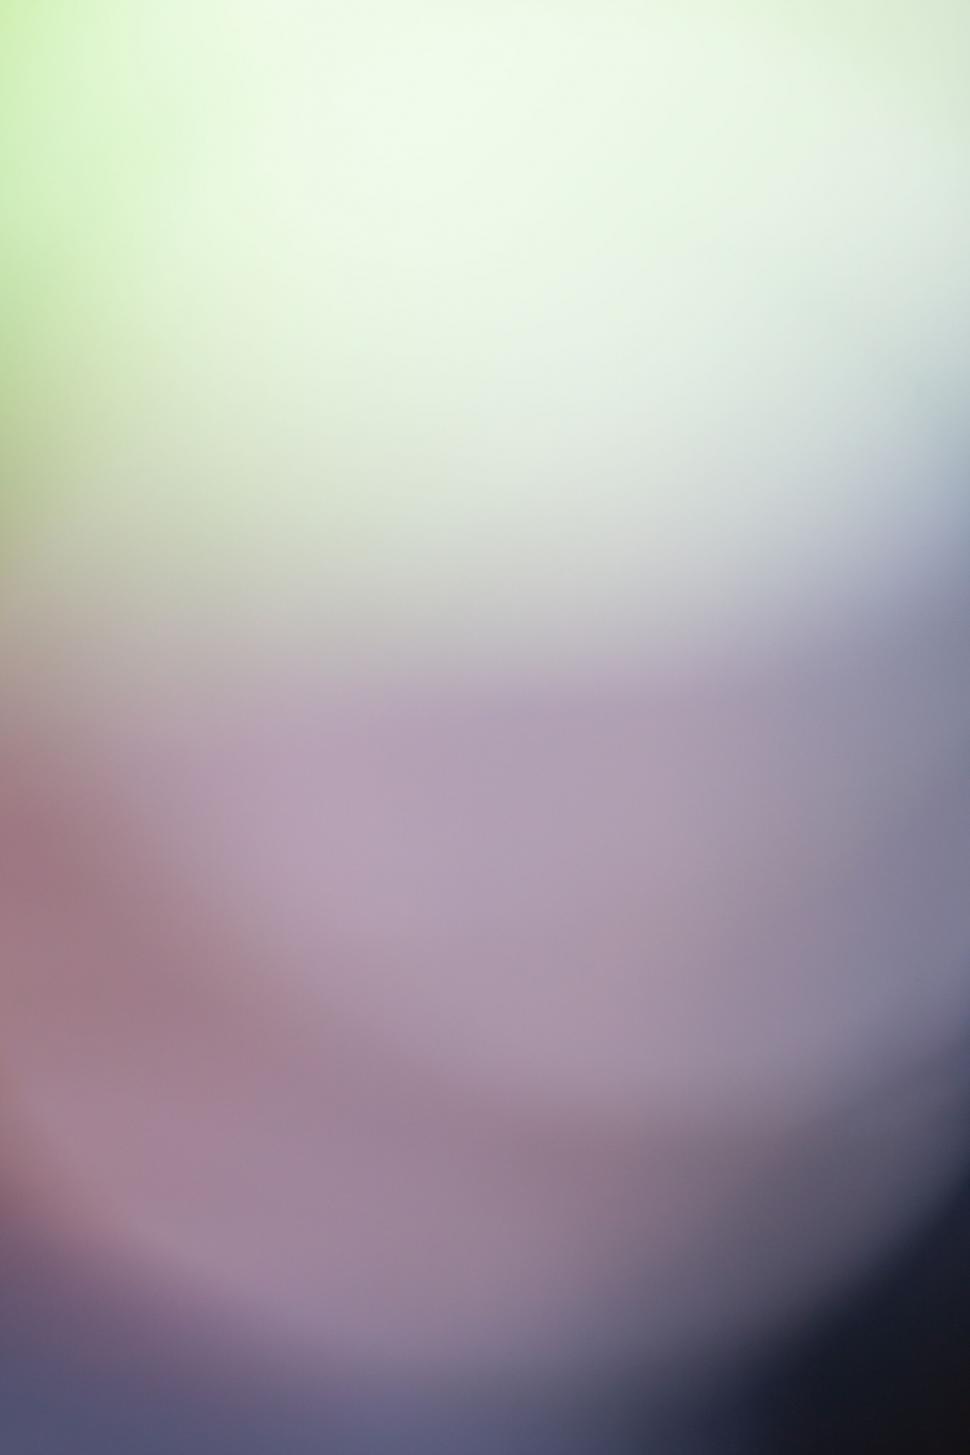 Free Image of Pastel pink and green gradient blur 